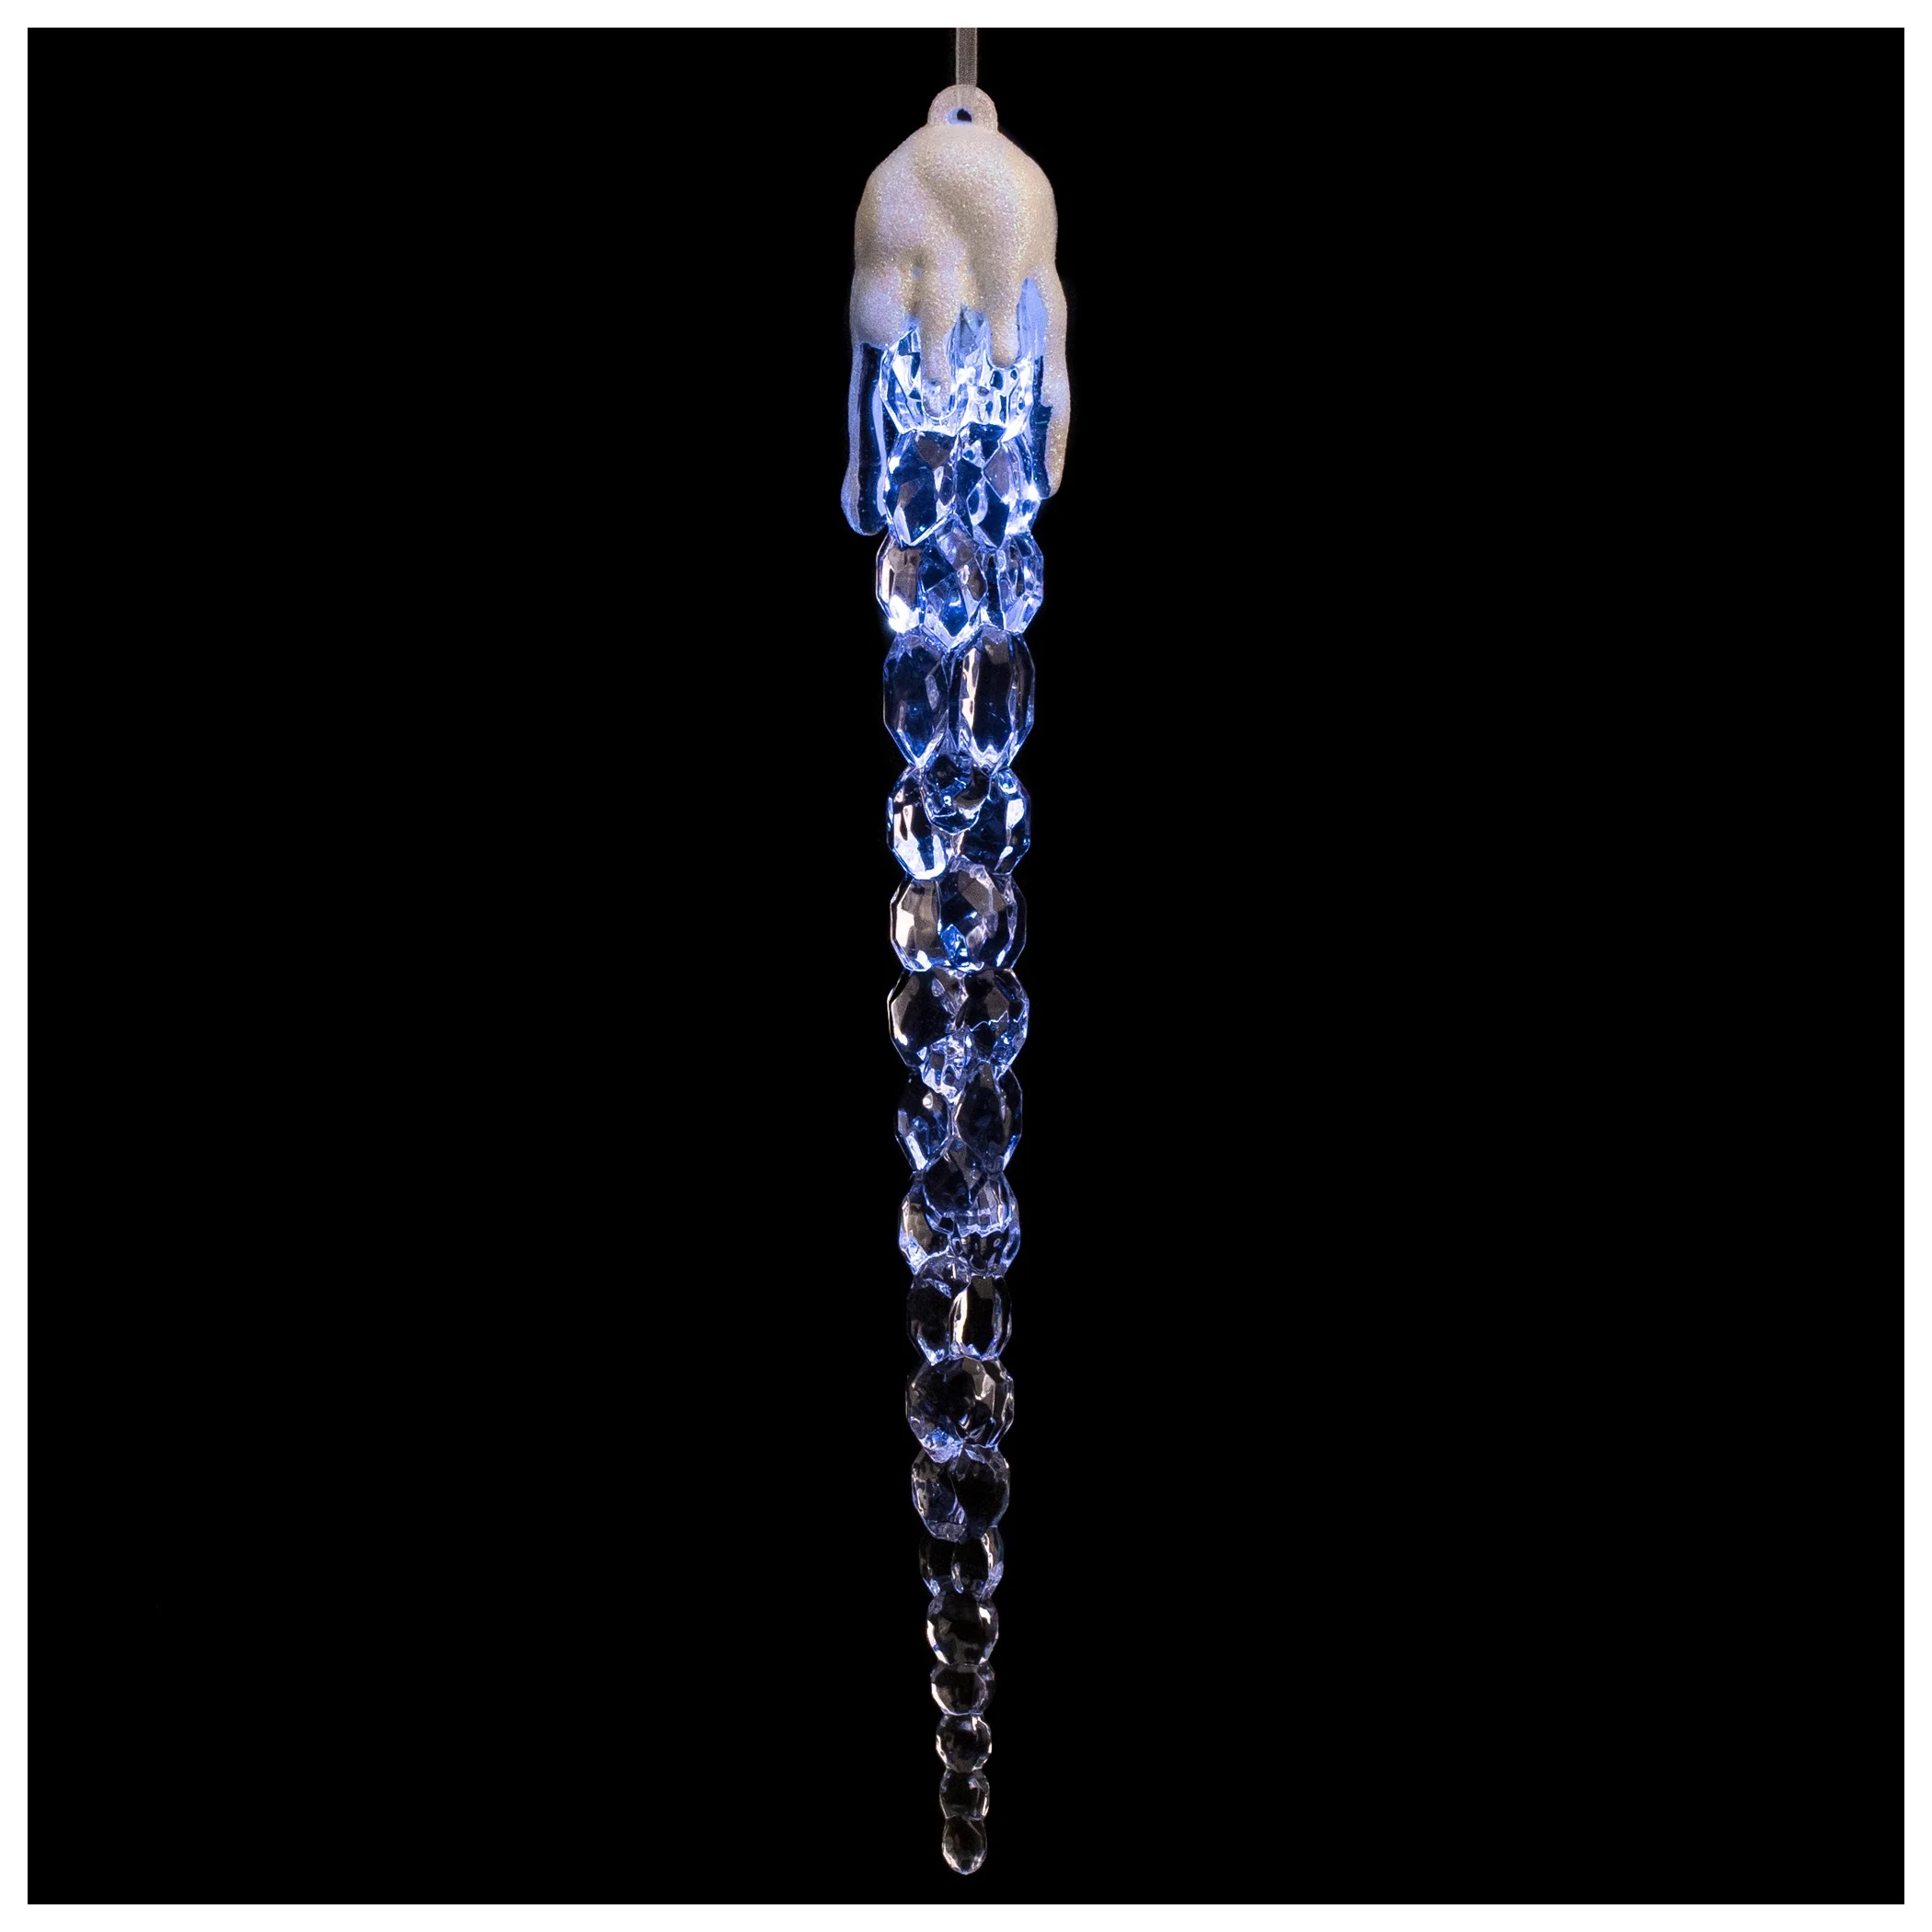 56 x Hanging Icicle Light Ornament - Large